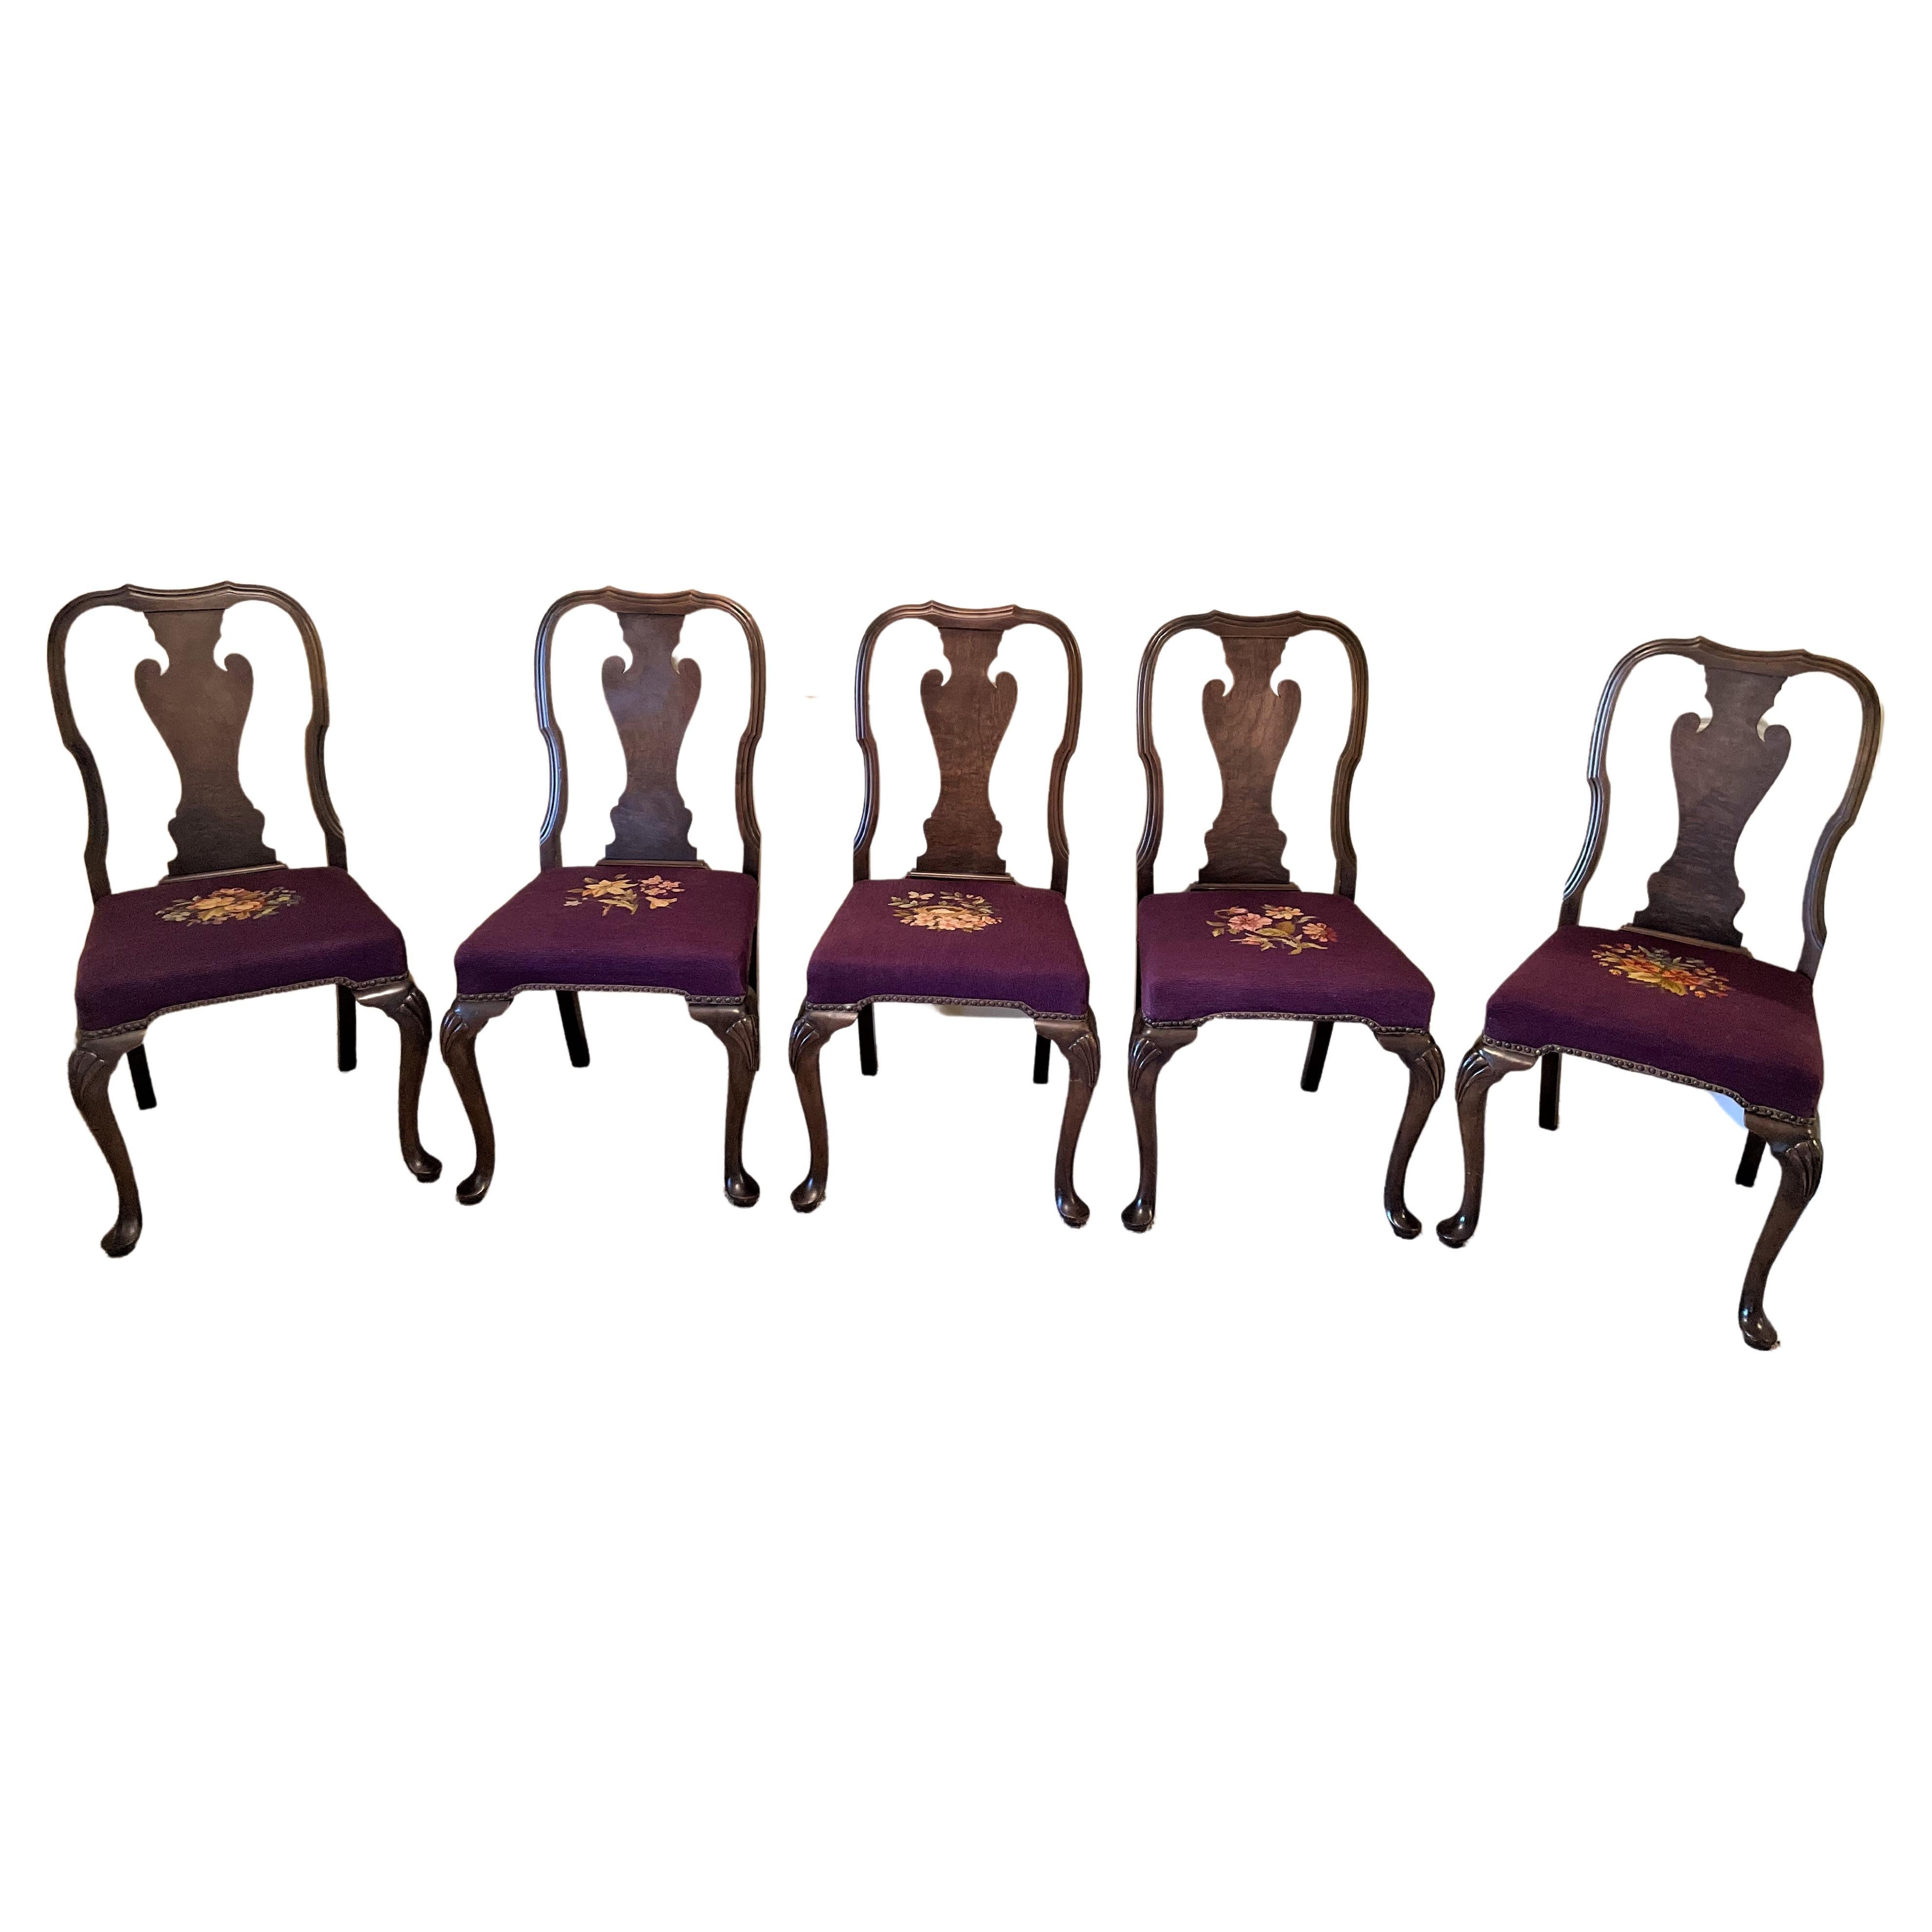 1930s Queen Ann Solid Walnut Dining Chairs with Aubergine Wool Needlepoint Seats For Sale